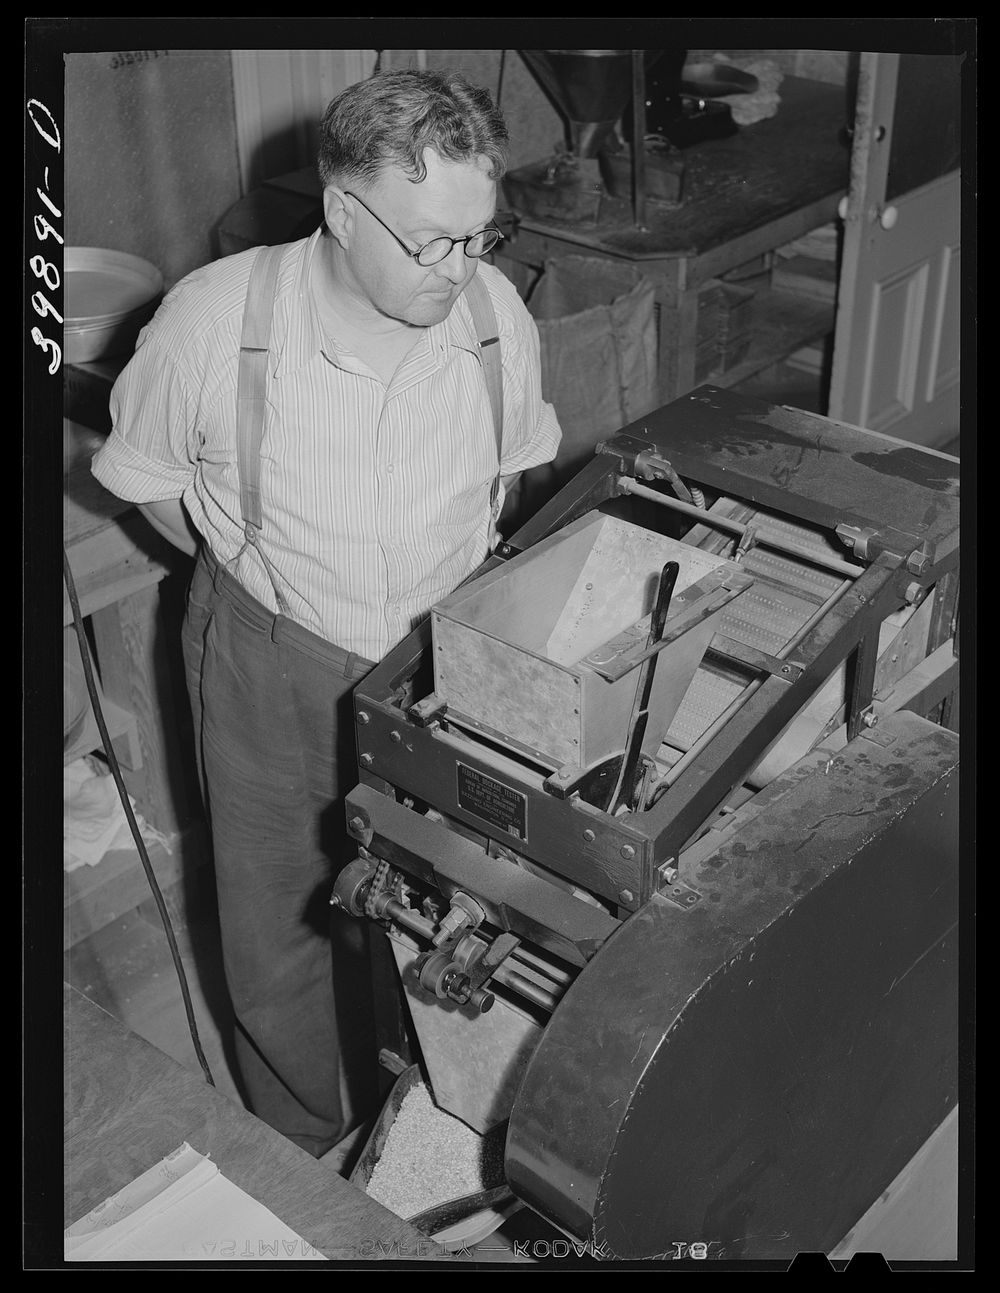 [Untitled photo, possibly related to: State inspector running dockage test on wheat. Walla Walla County, Washington] by…